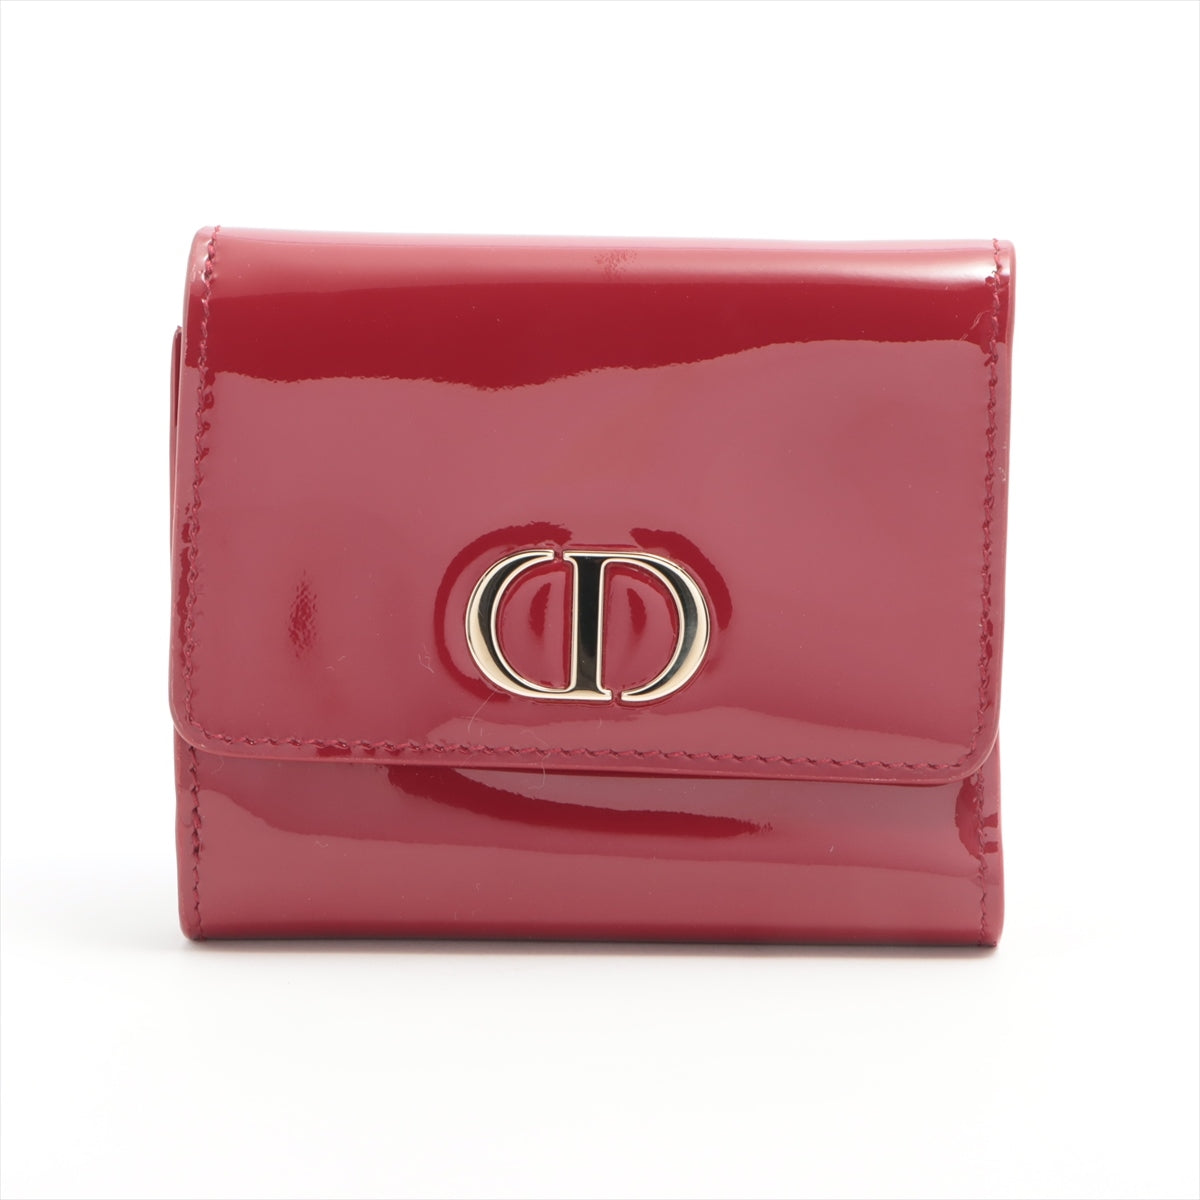 Christian Dior 30 Montaigne Patent leather Compact Wallet Red